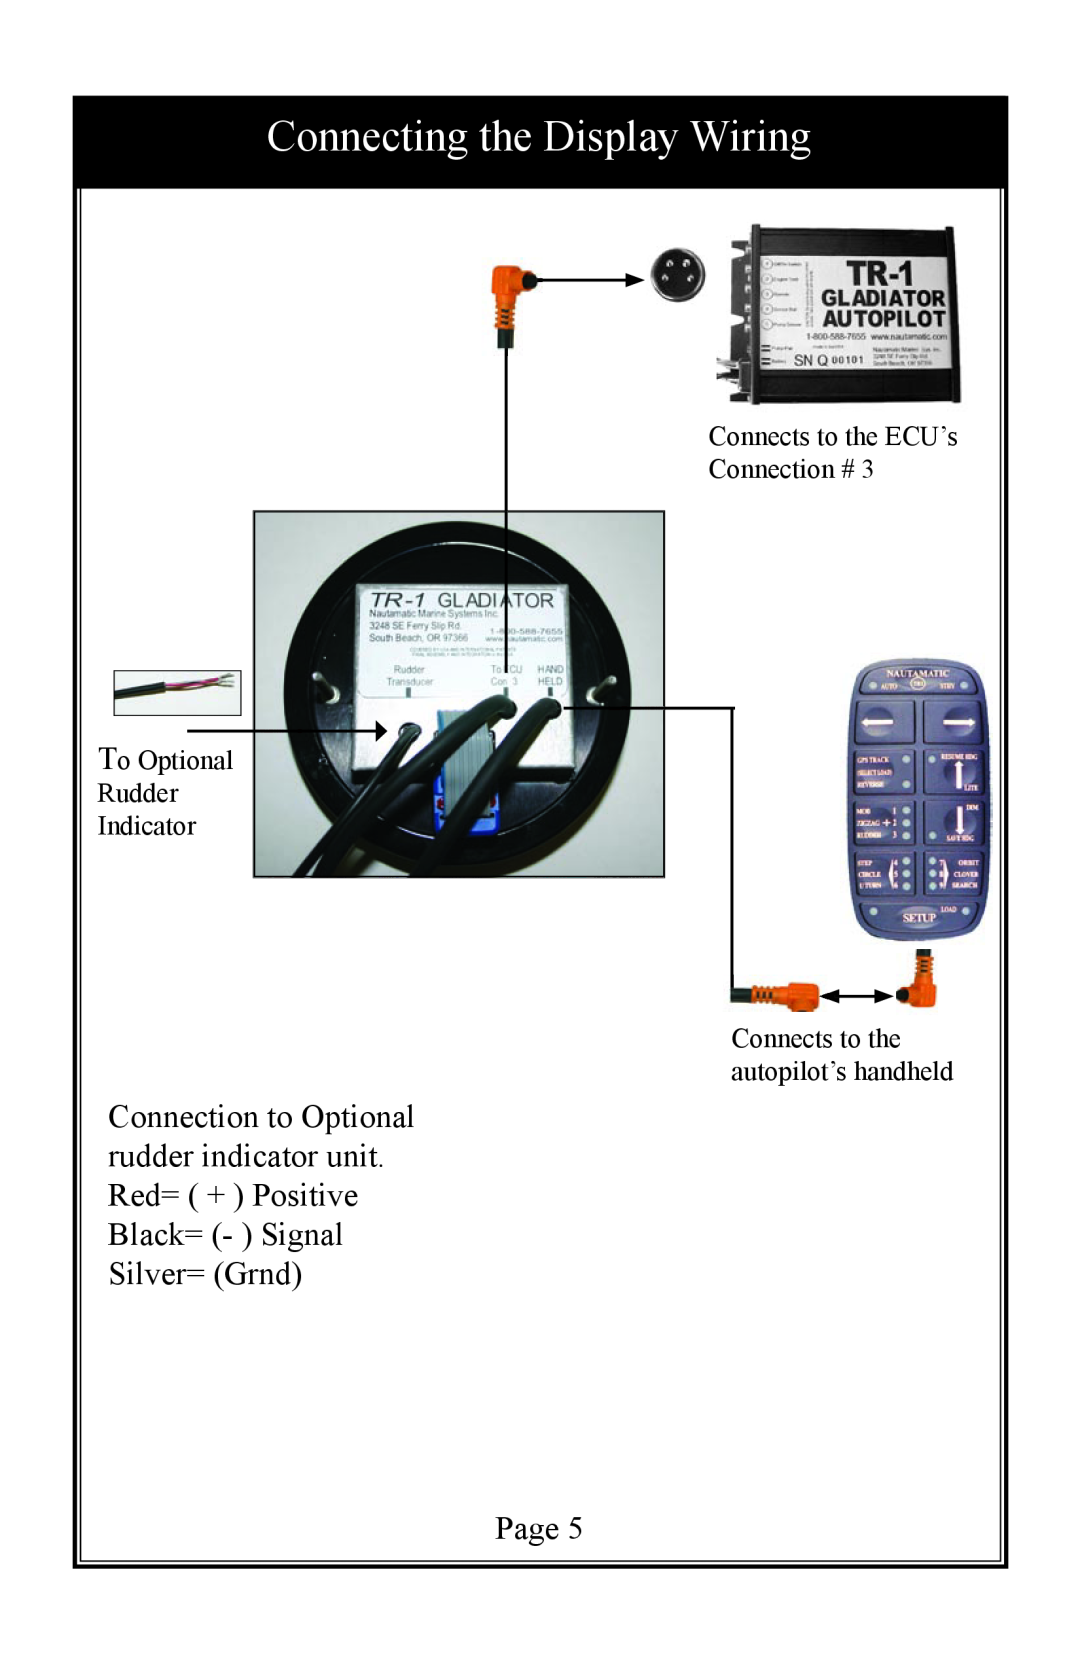 Garmin TR-1 owner manual Connecting the Display Wiring, Connects to the ECU’s Connection # To Optional Rudder Indicator 